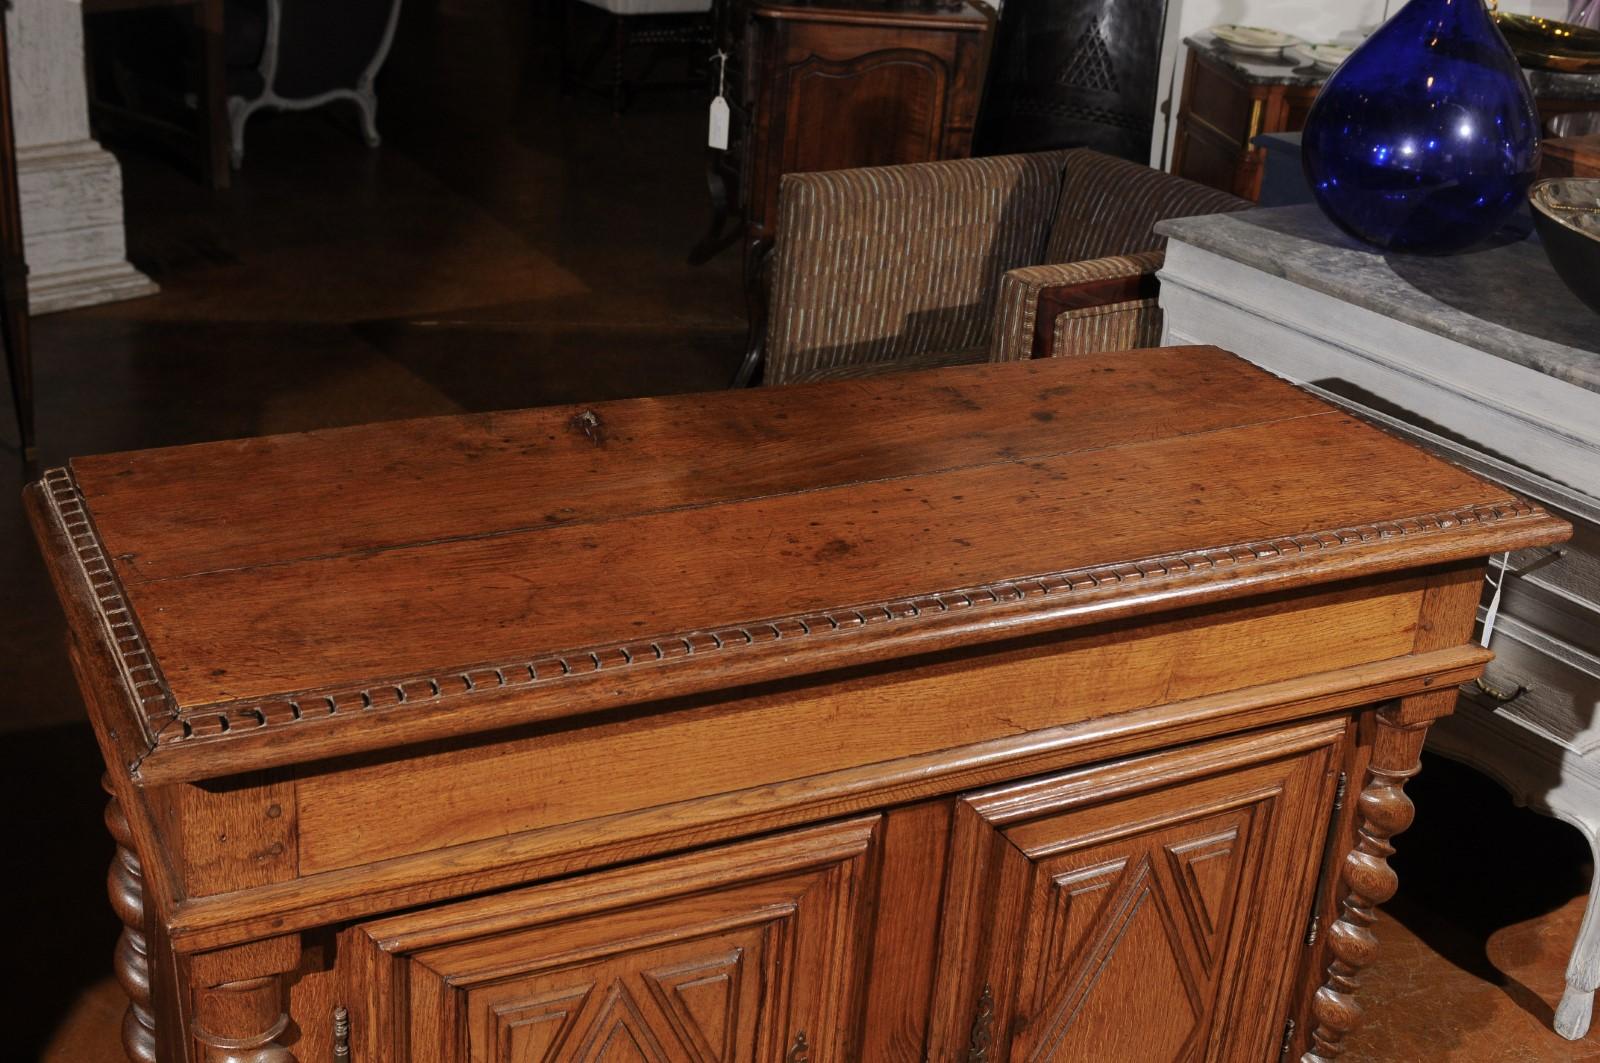 A French Louis XIII style oak buffet from the mid-19th century, with diamond motifs and barley twist columns. Born in France during the reign of Emperor Napoleon II, this oak buffet presents the stylistic characteristics of the Louis XIII era. The